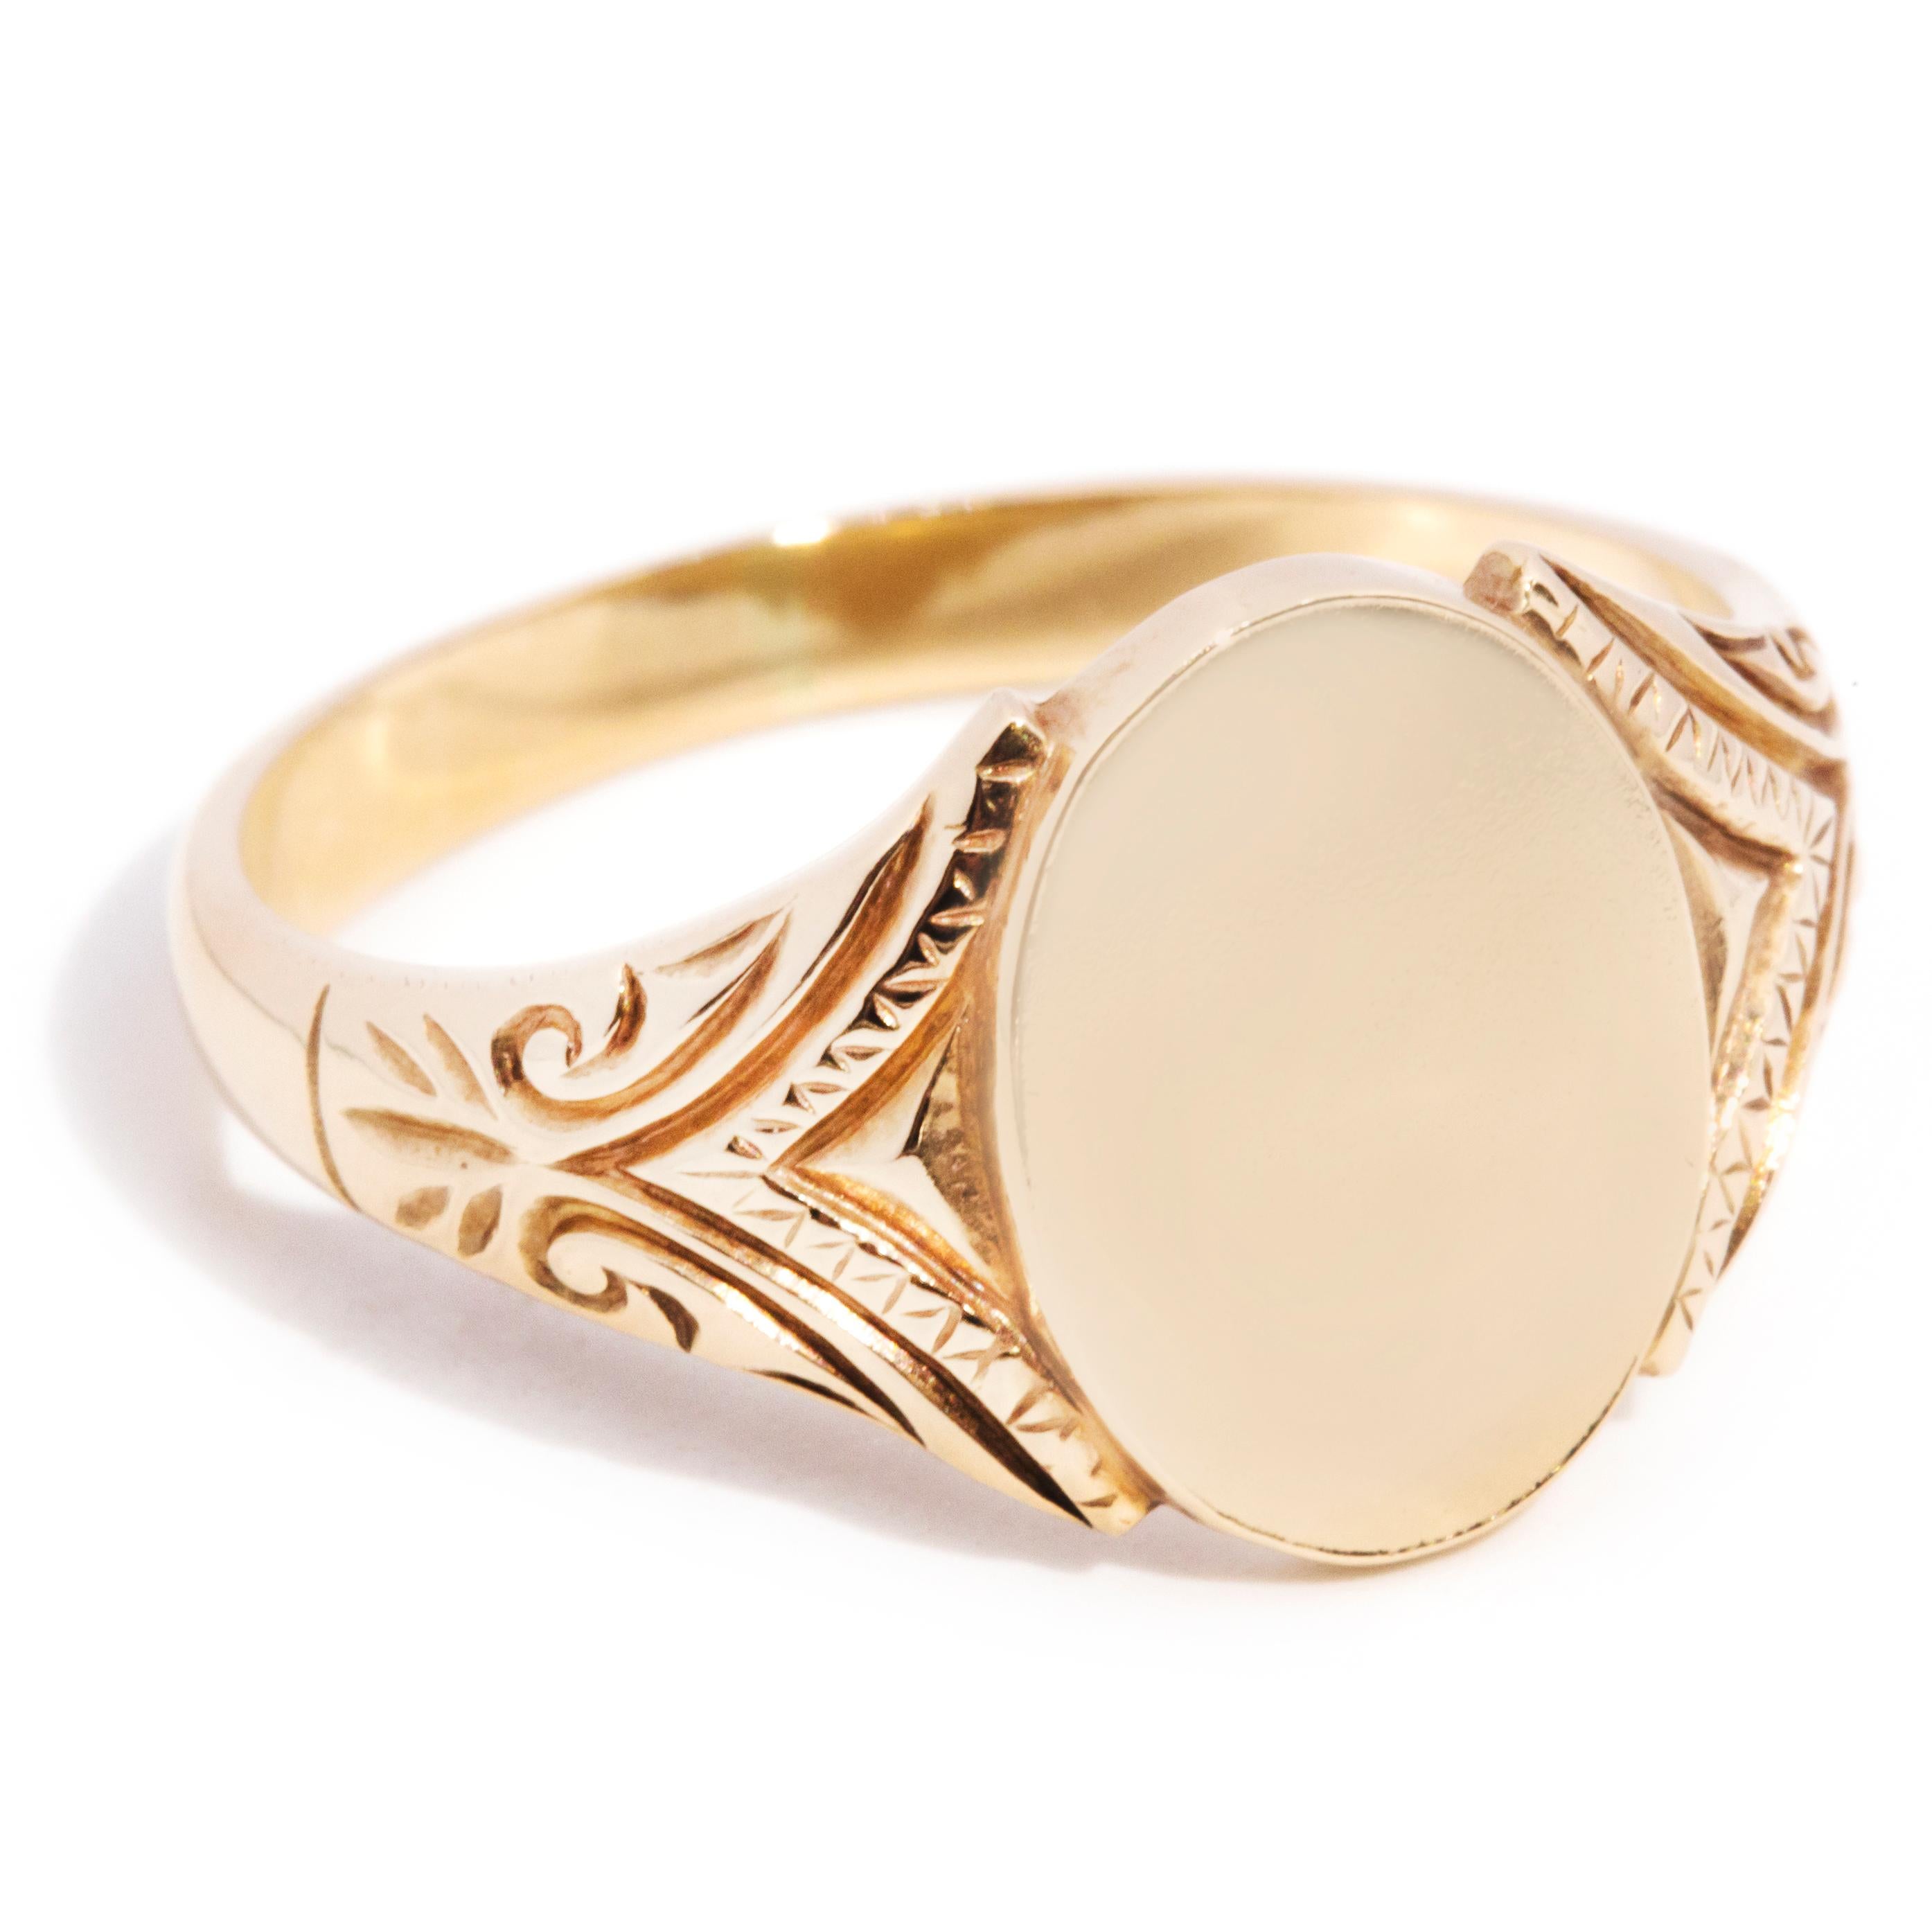 Forged in 9 carat yellow gold, this dapper men's signet ring features a high polish curved band flowing into intricate pattern shoulders and an unmarked oval platform with room for personal engraving. We have named this suave vintage jewel The